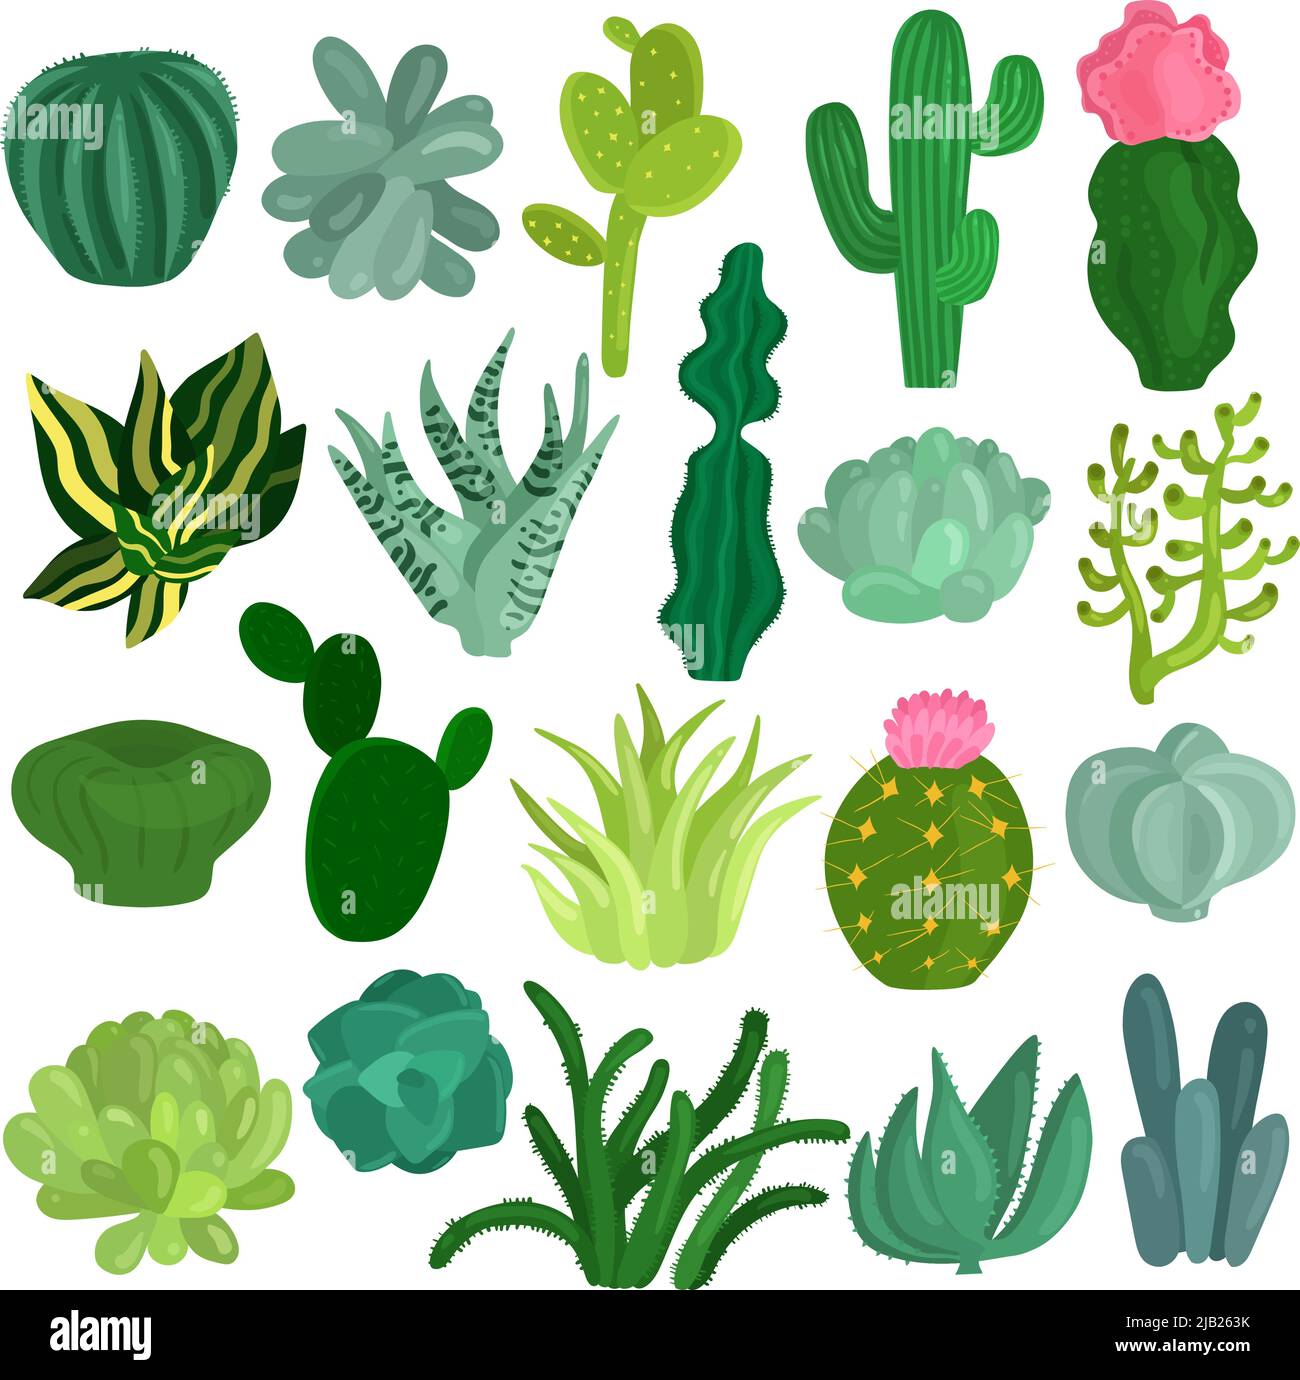 Cacti and succulent plants varieties flat icons collection with aloe crassula echeveria opuntia euphorbia isolated vector illustration Stock Vector